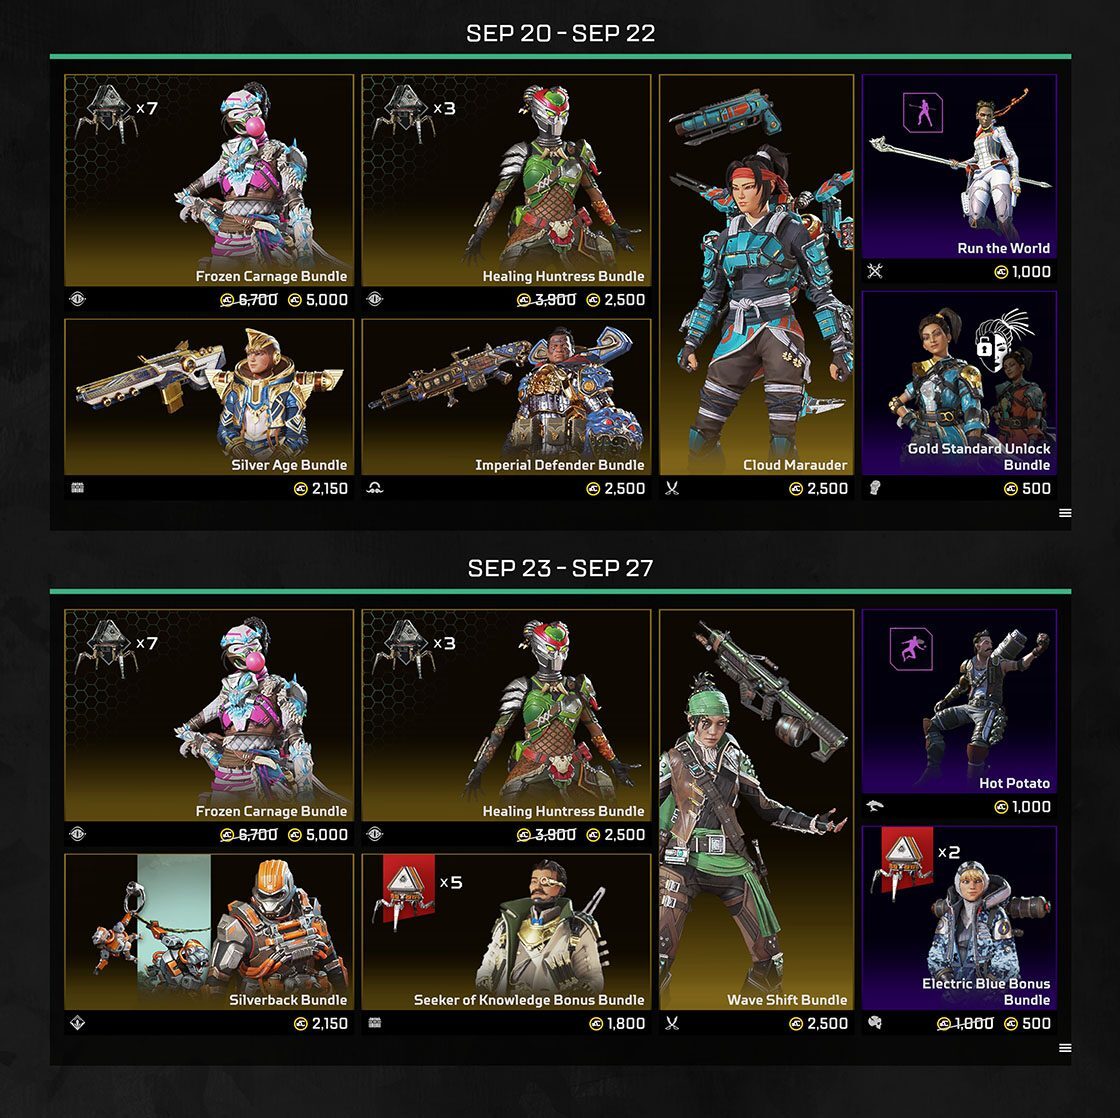 The store bundles feature skins both old and new.